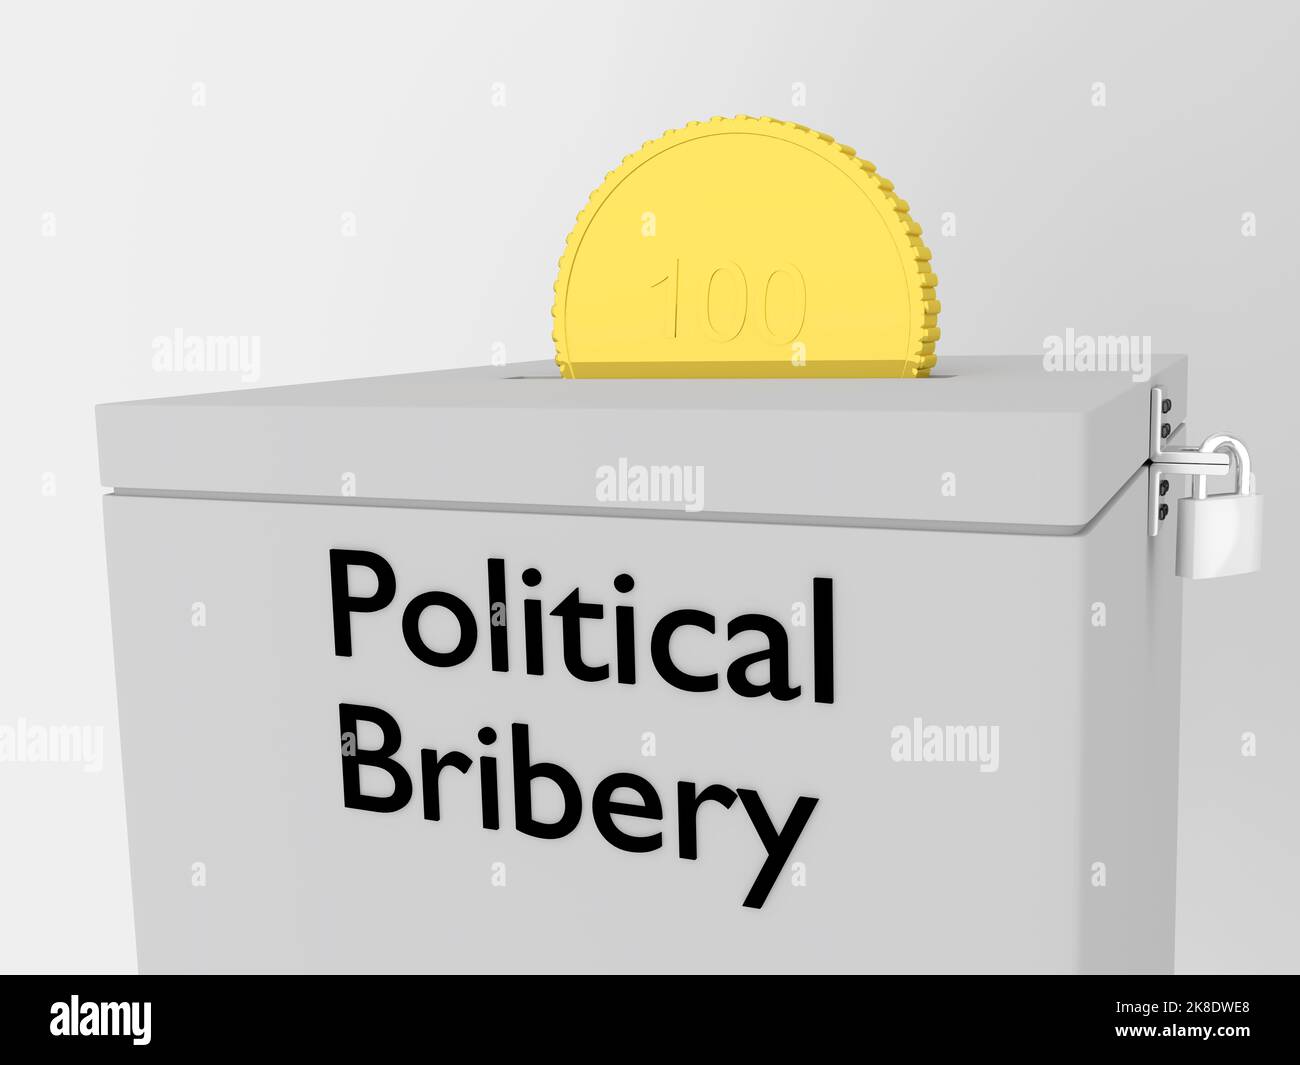 3D illustration of a golden coin insreted into a ballot box, titled as Political Bribery. Stock Photo